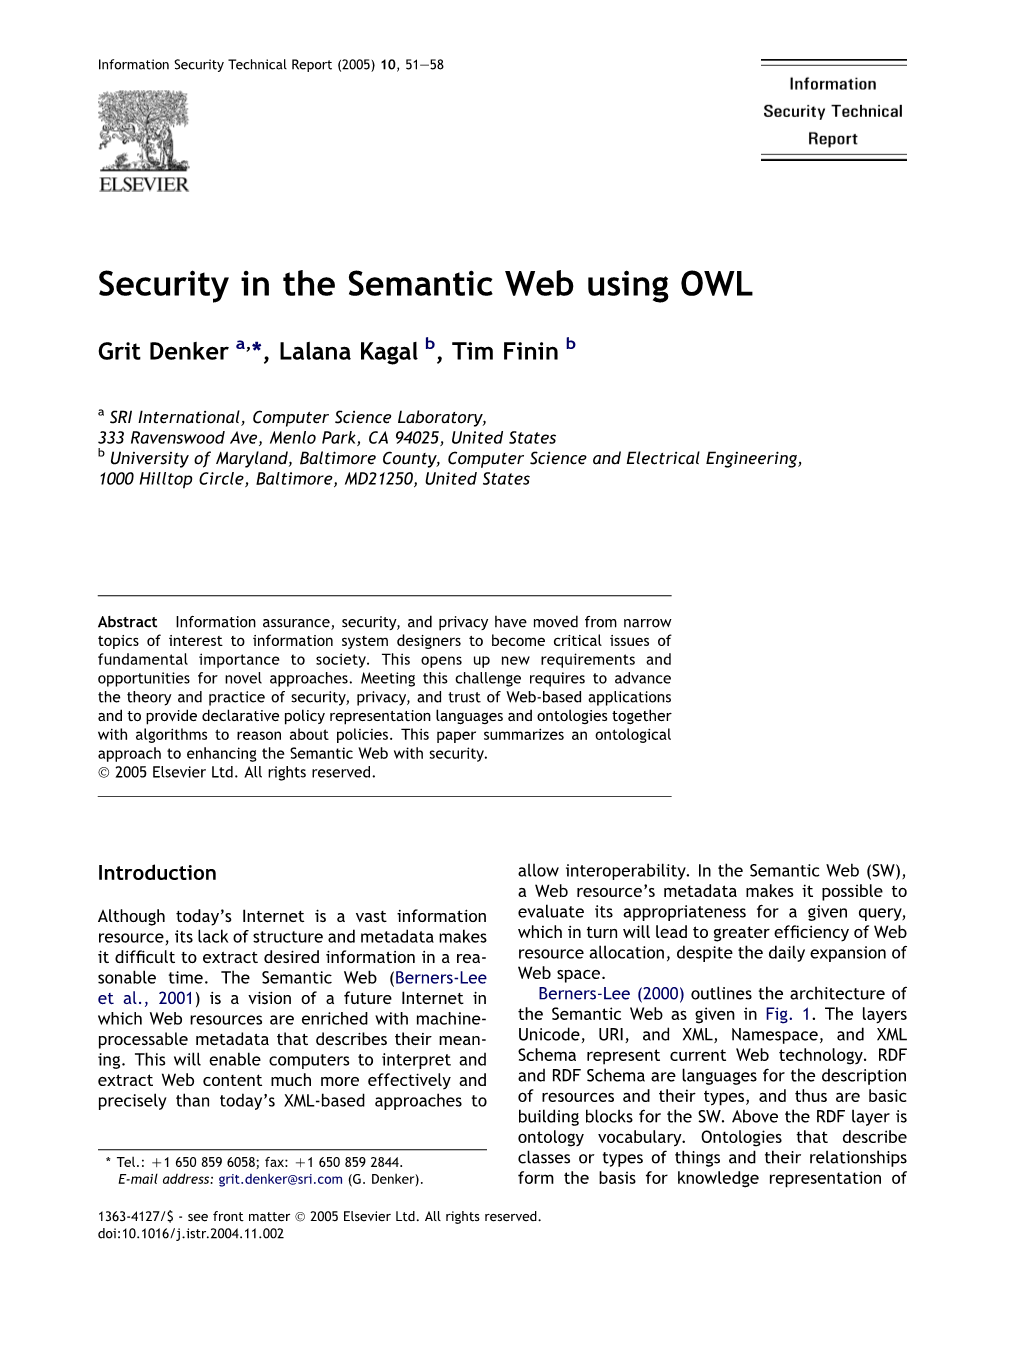 Security in the Semantic Web Using OWL